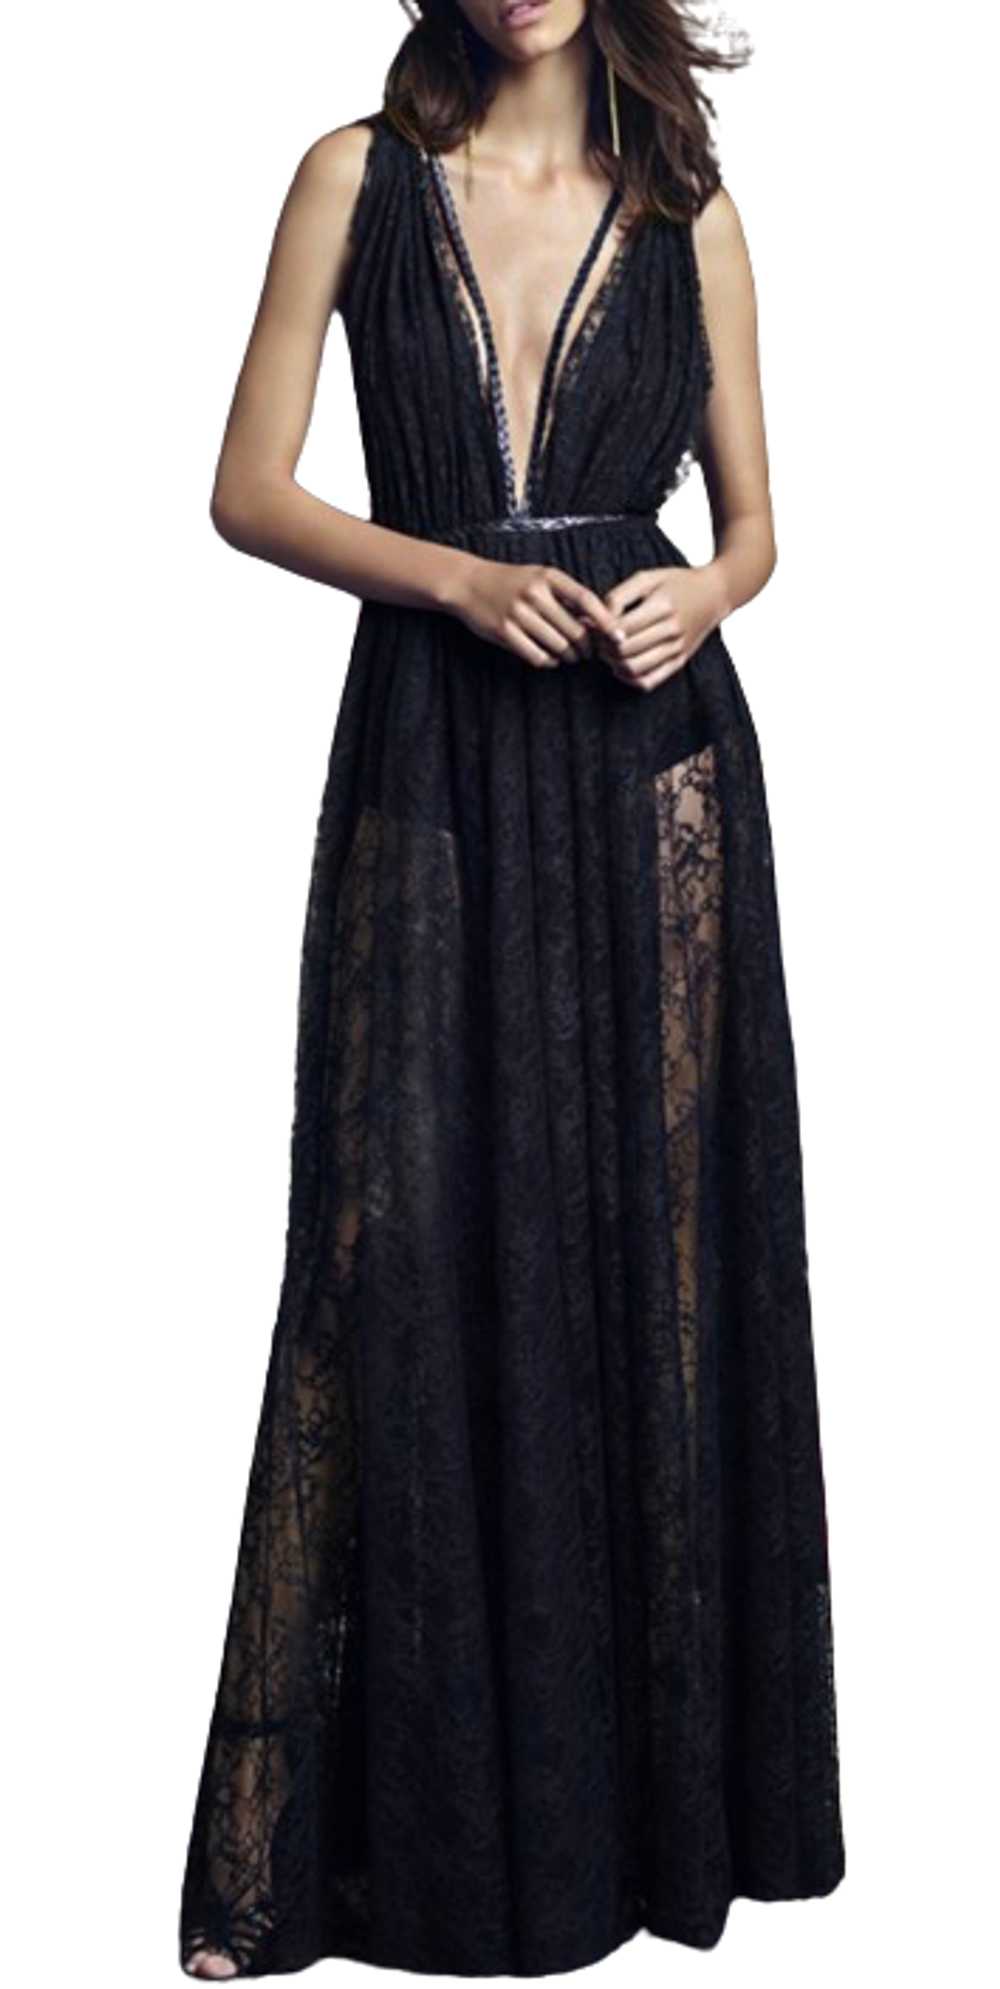 Product Details Black Sheer Lace Plunge Gown - image 1